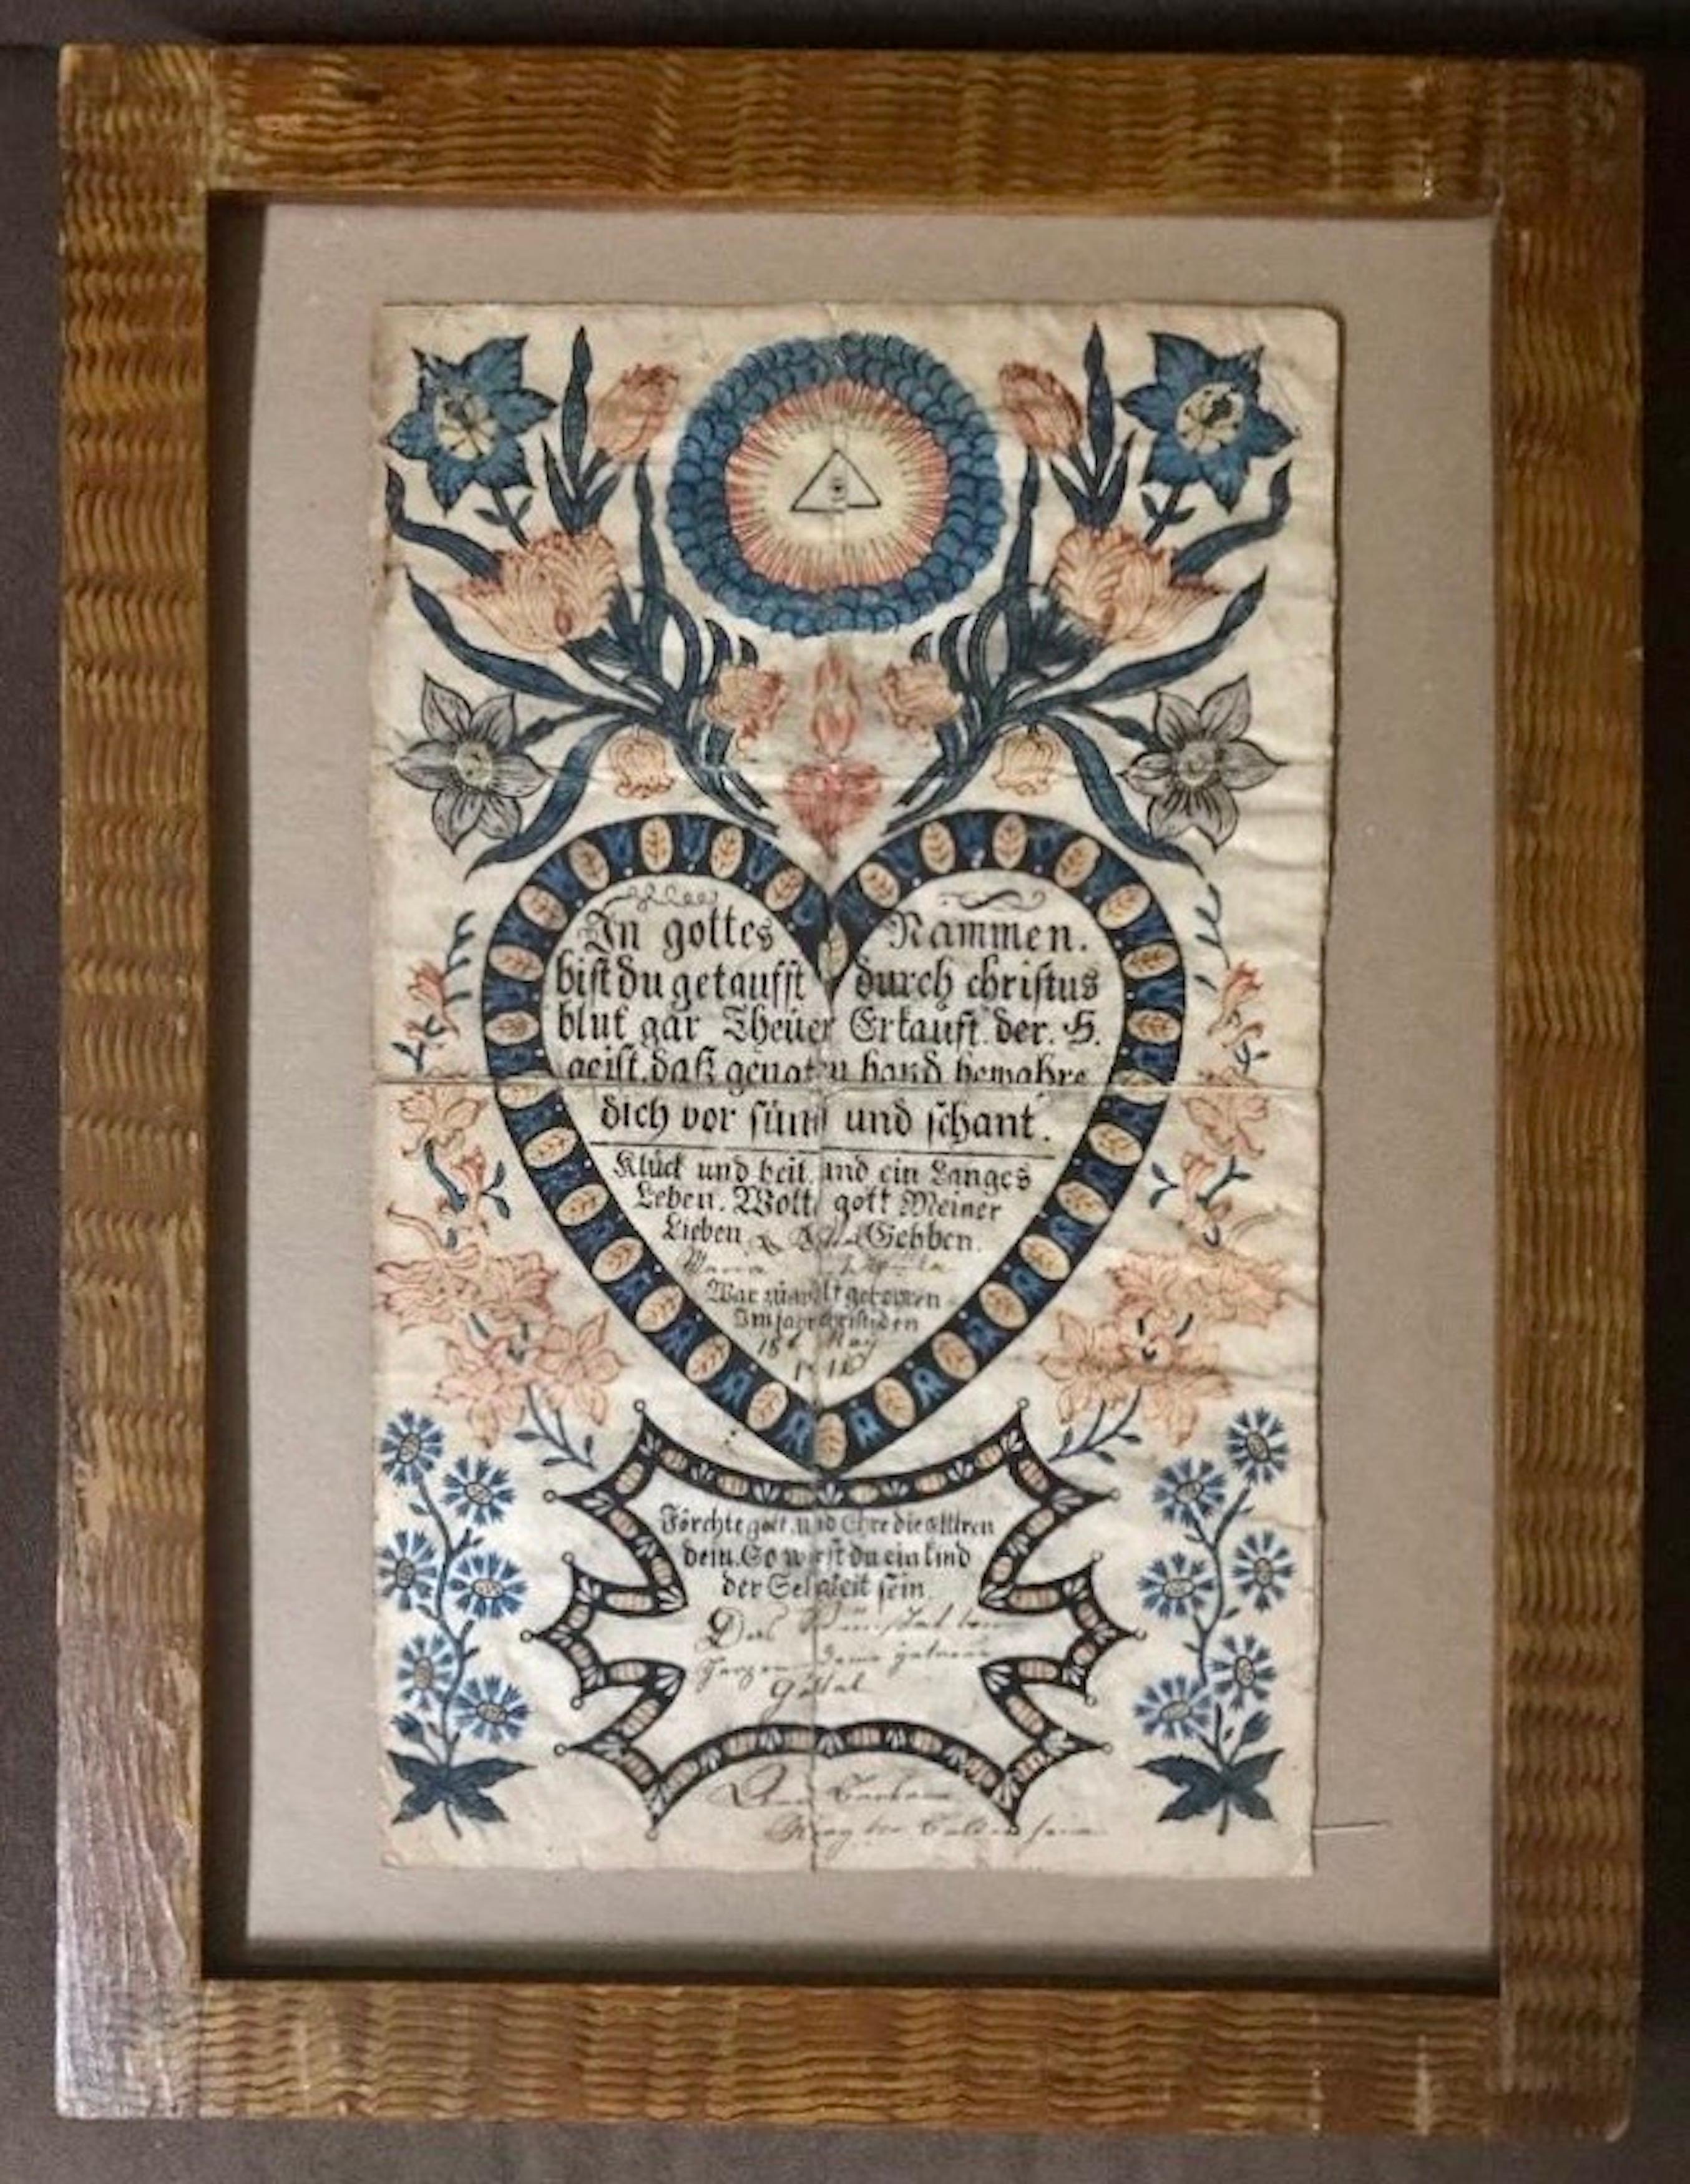 Batismal record for Maria Ursula, dated 1811, size: 13 1/2